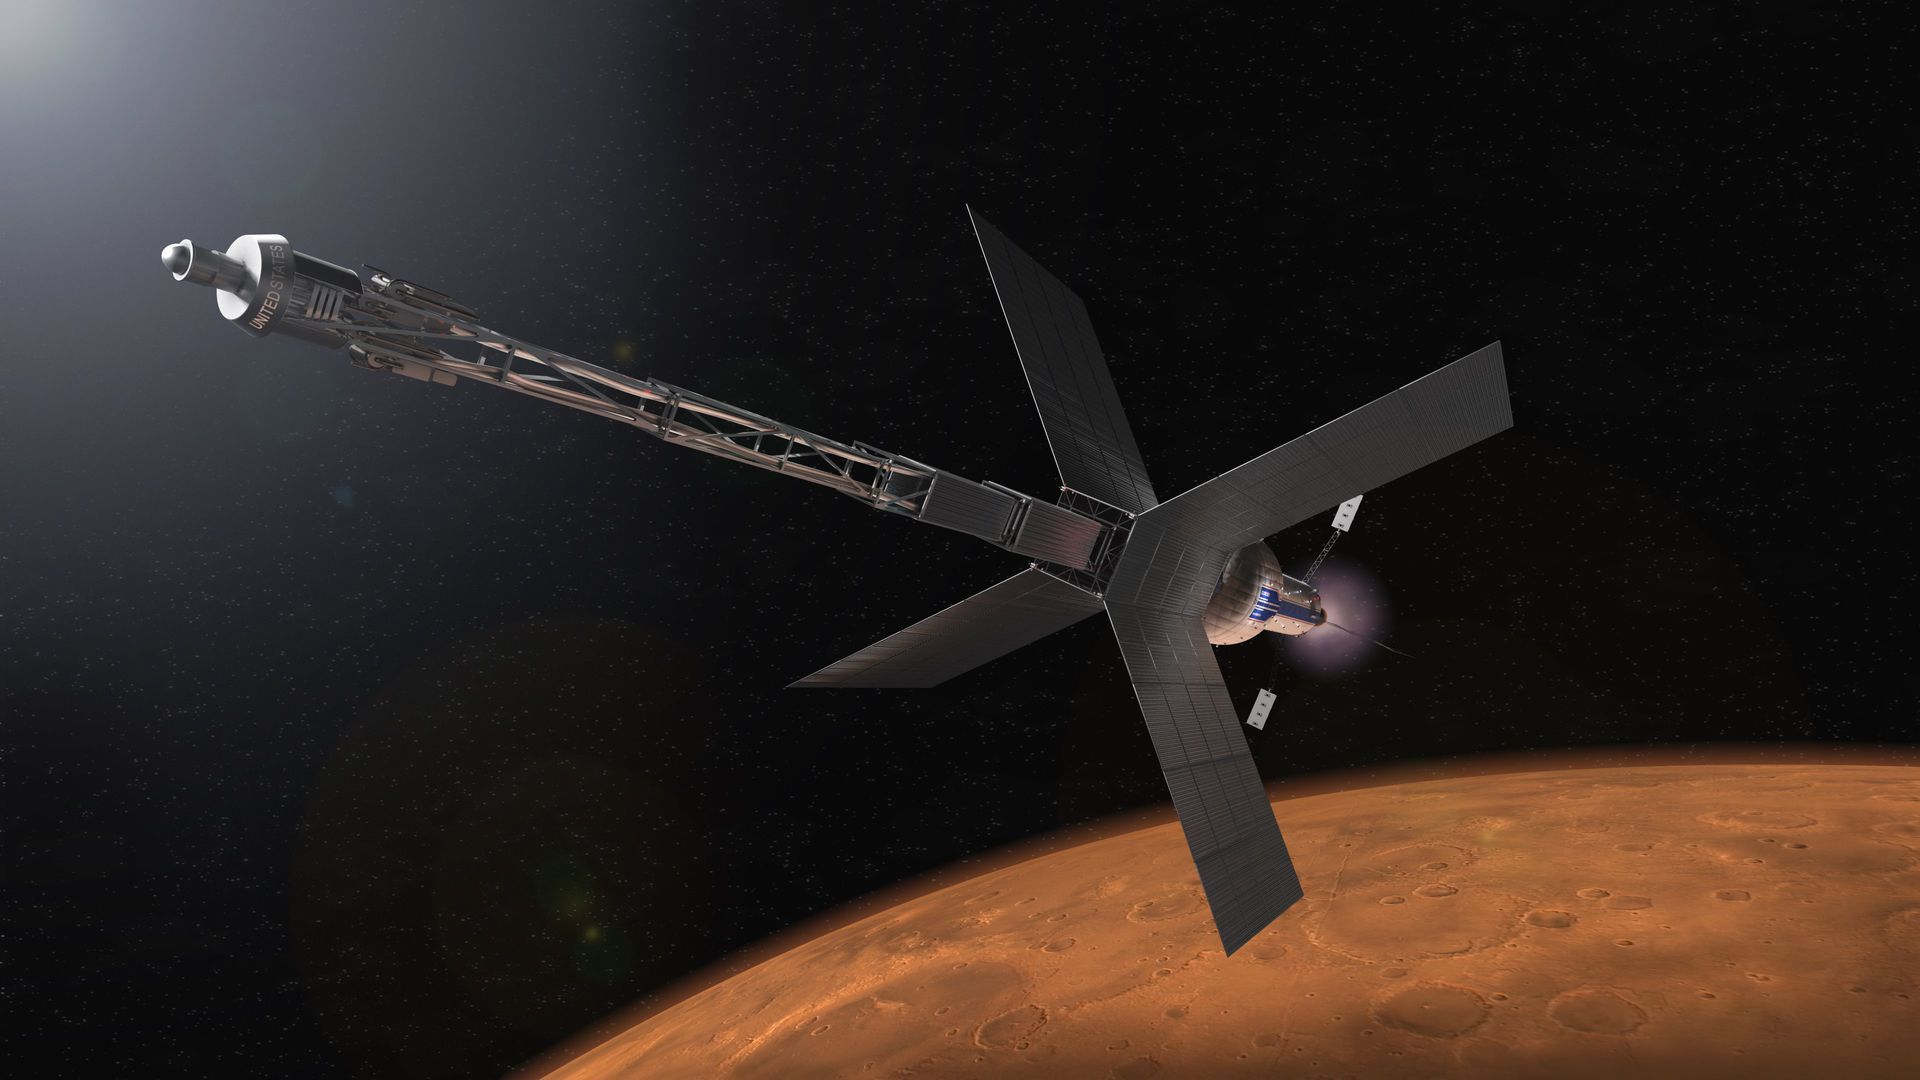 Artist's illustration of a nuclear propulsion system and habitat around Mars. Image: NASA